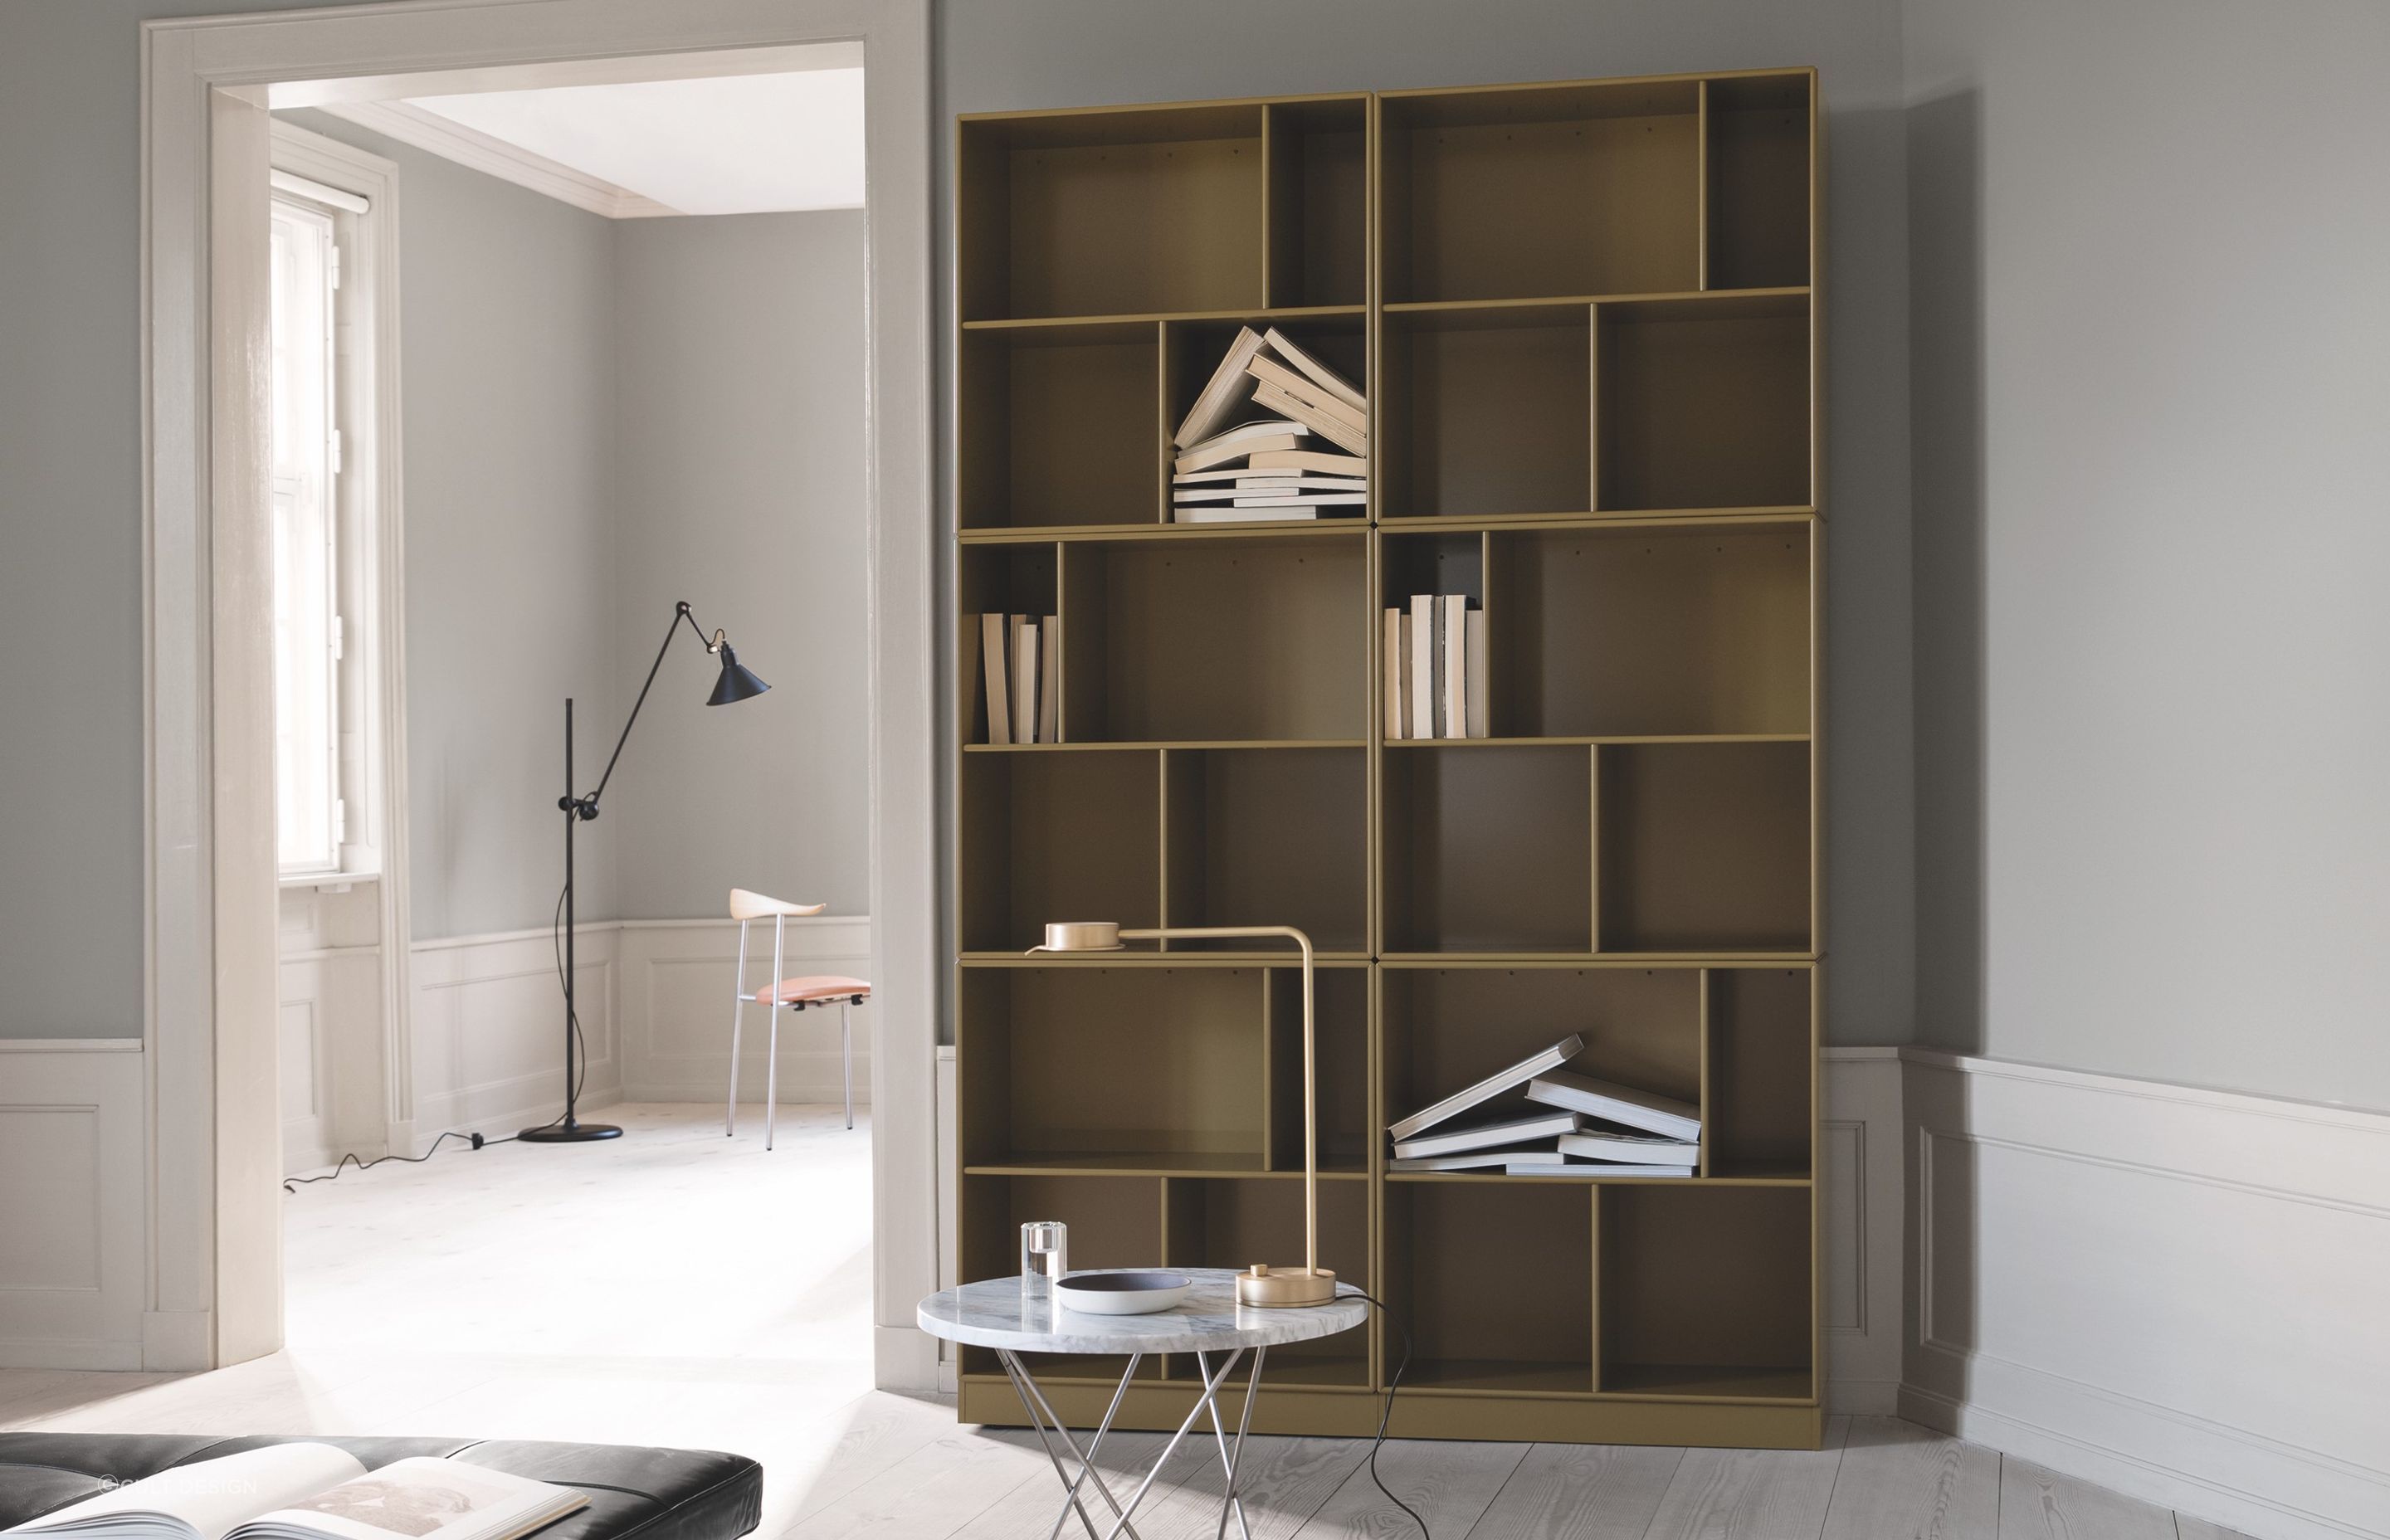 A comfortable use of negative space, seen here with the stylish Read Bookshelf by Montana.